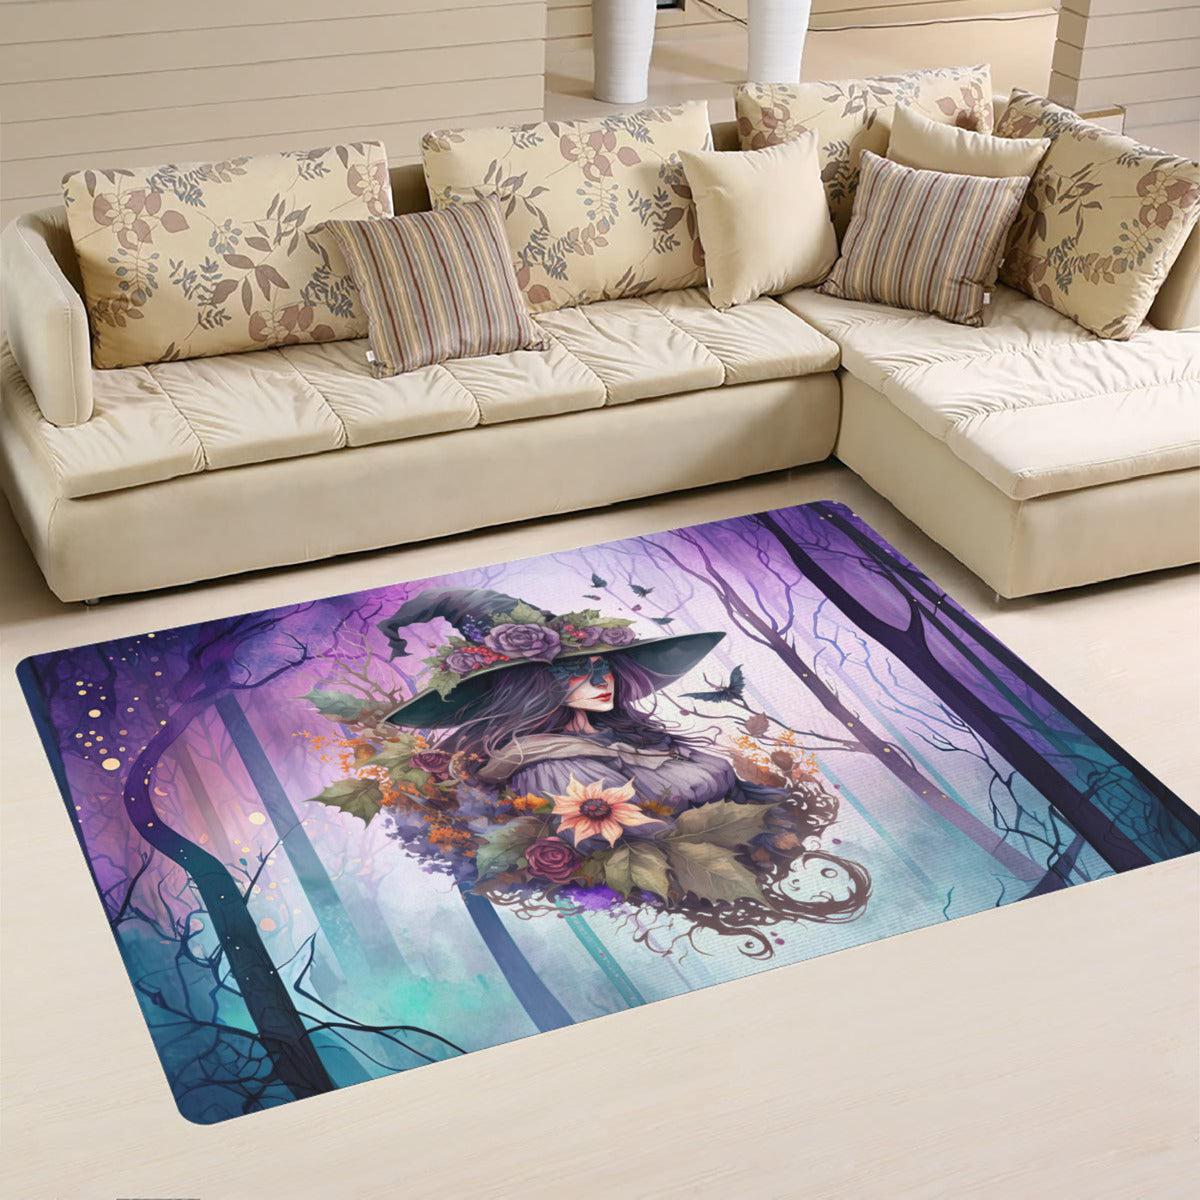 Floral witch area rug Witchy rug-MoonChildWorld